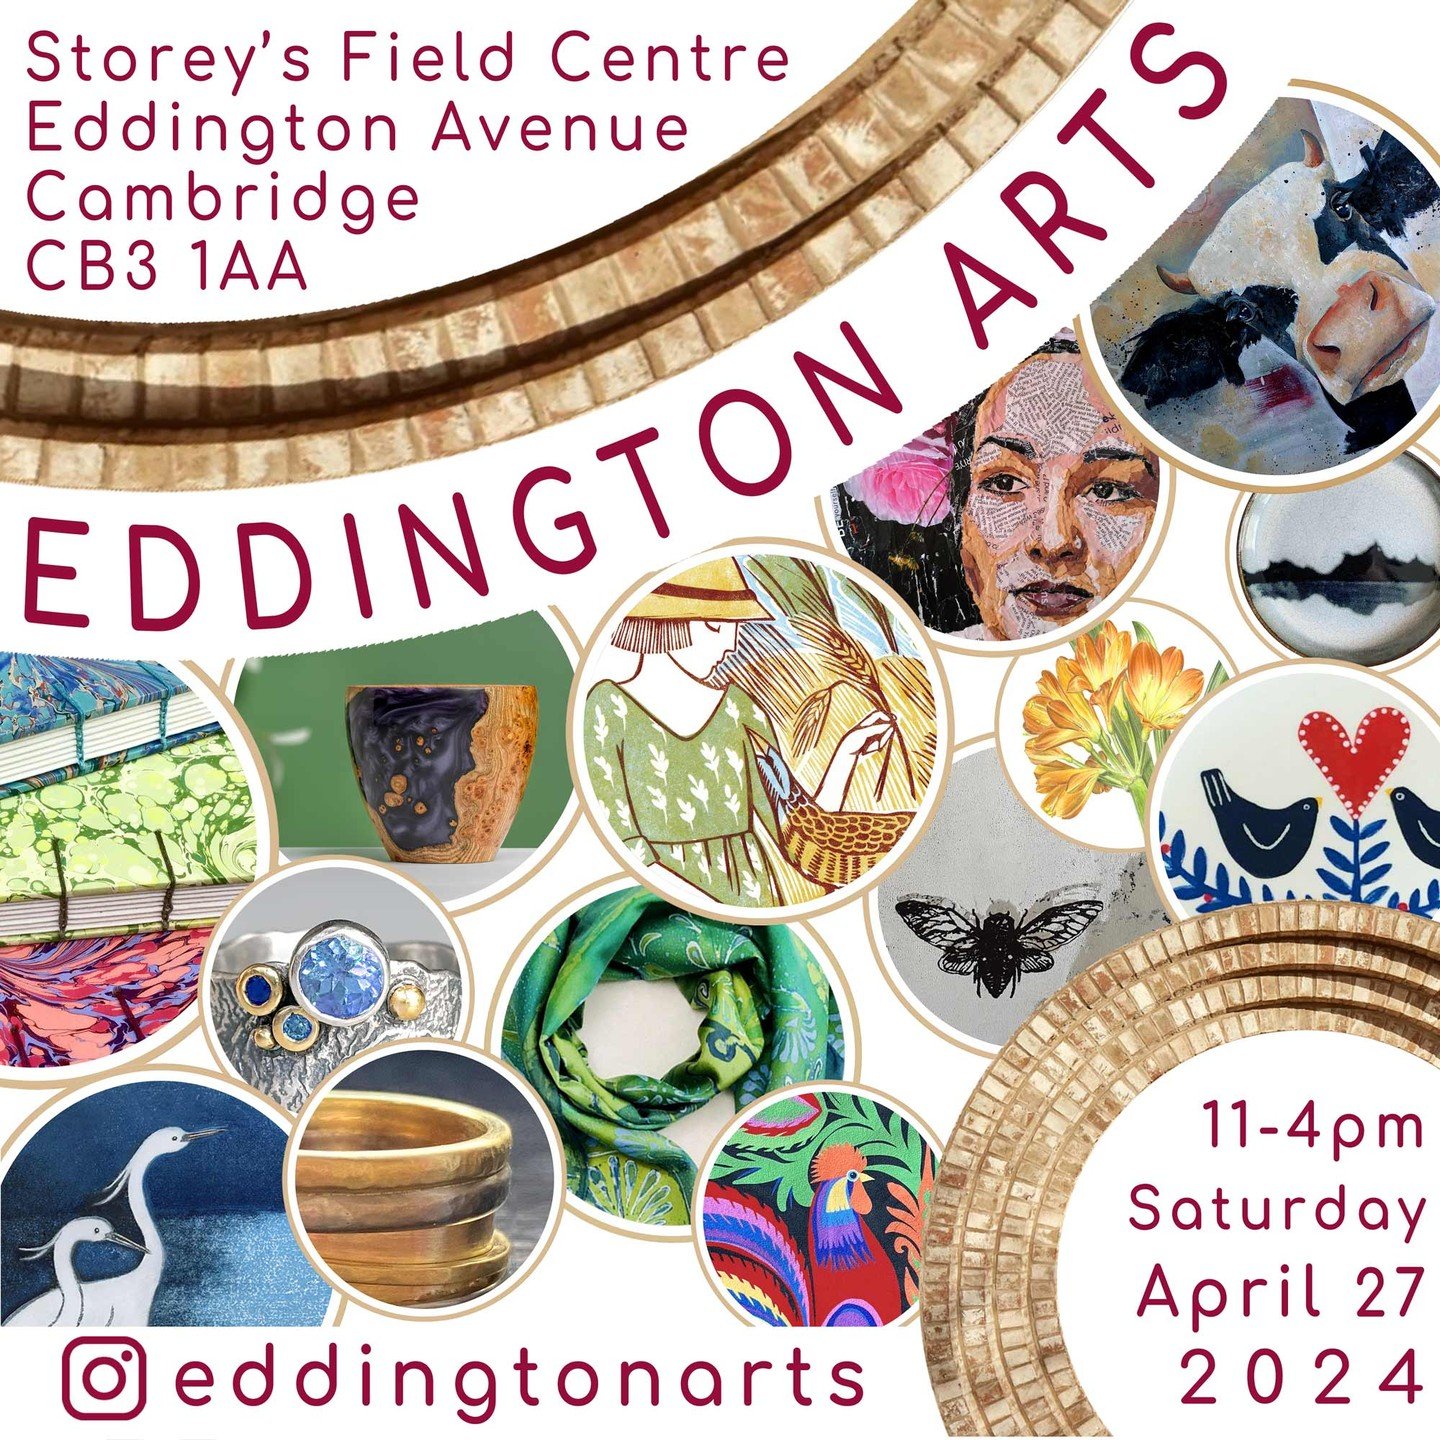 💥Just 2 weeks to go until @EddingtonArts on April 27th! The fourth event of its kind, even bigger and better than before! 

😍 There&rsquo;ll be a great selection of art and craft. Jewellery, glass, baskets, ceramics, fine art prints, clocks, textil